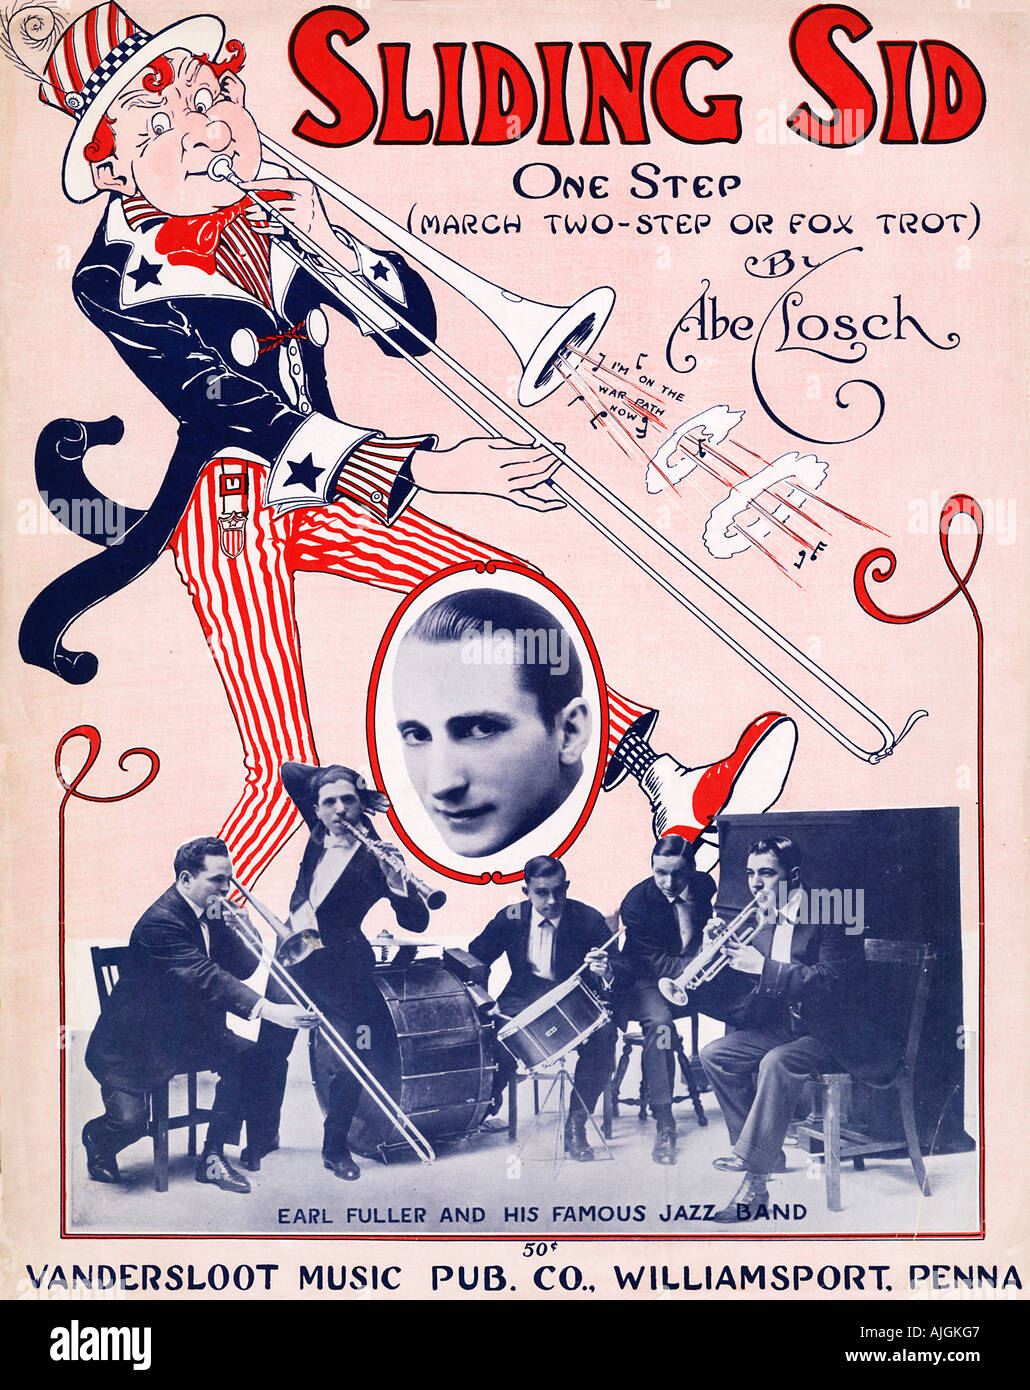 Sliding Sid, 1918 music sheet cover featuring Earl Fuller and his band for the One Step dance music Stock Photo